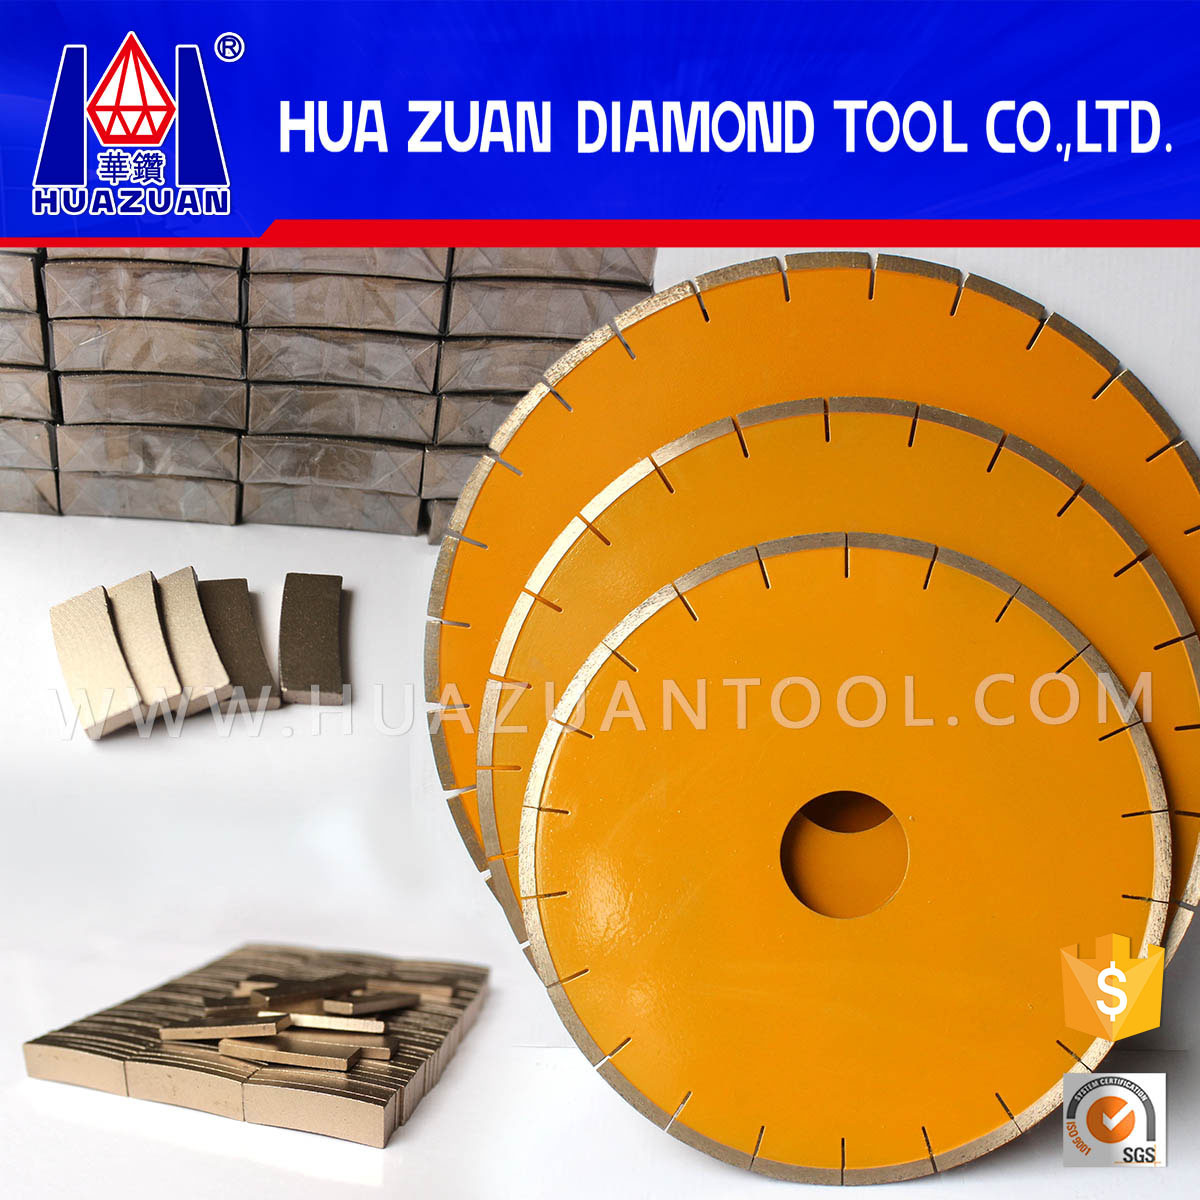 Sharp 400mm Saw Blade for Marble Stone Cutting (HZMB14400)